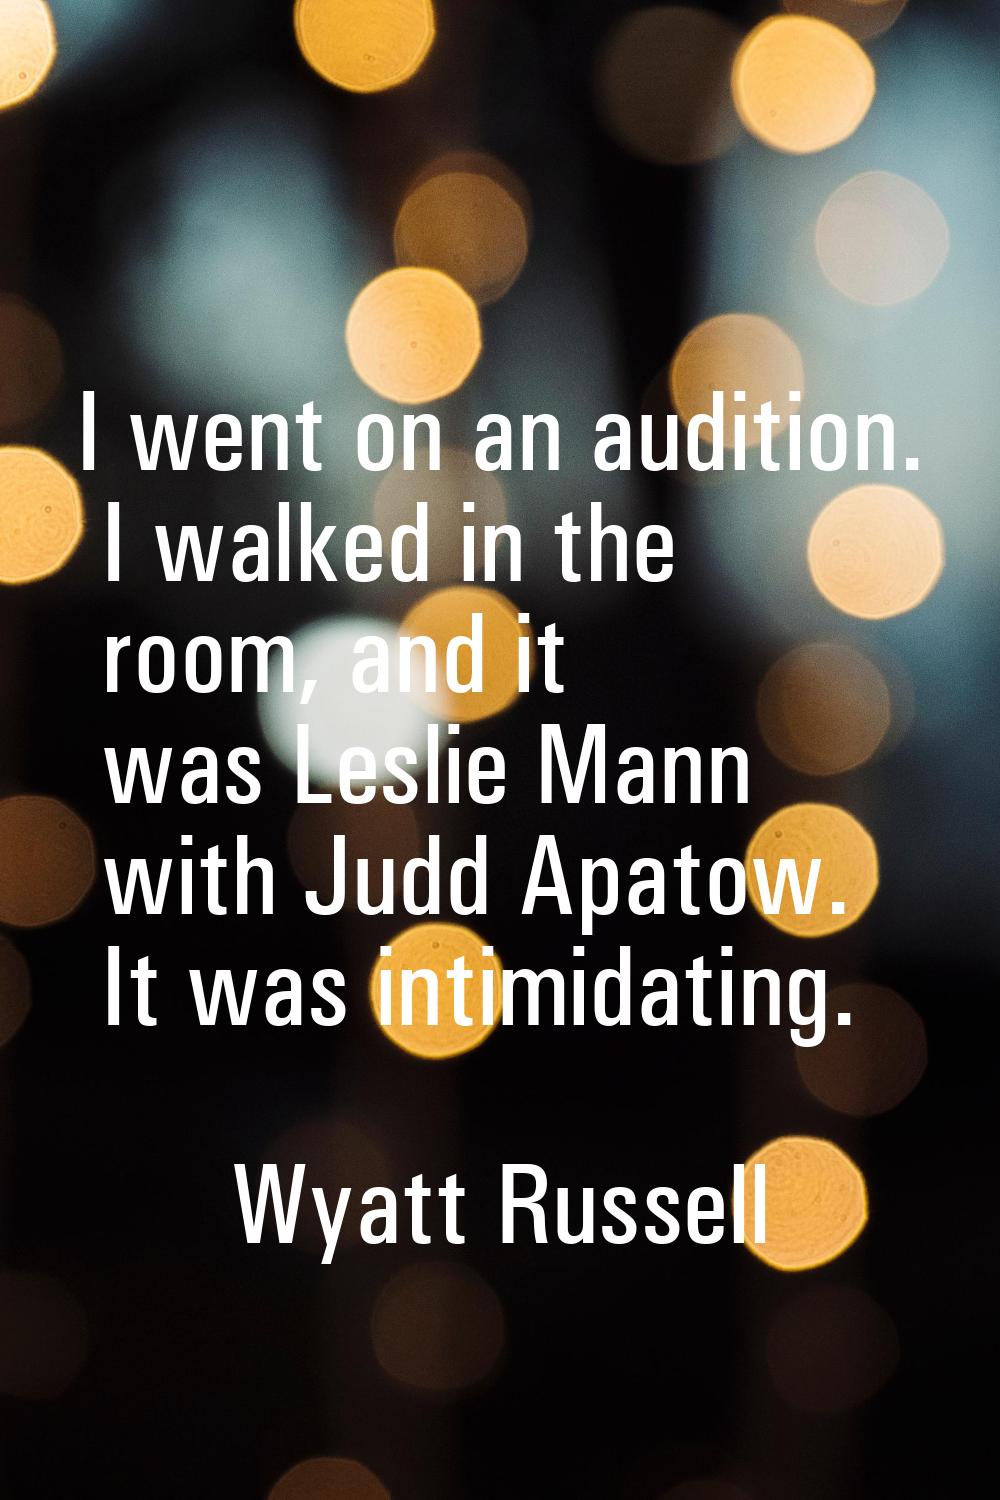 I went on an audition. I walked in the room, and it was Leslie Mann with Judd Apatow. It was intimi